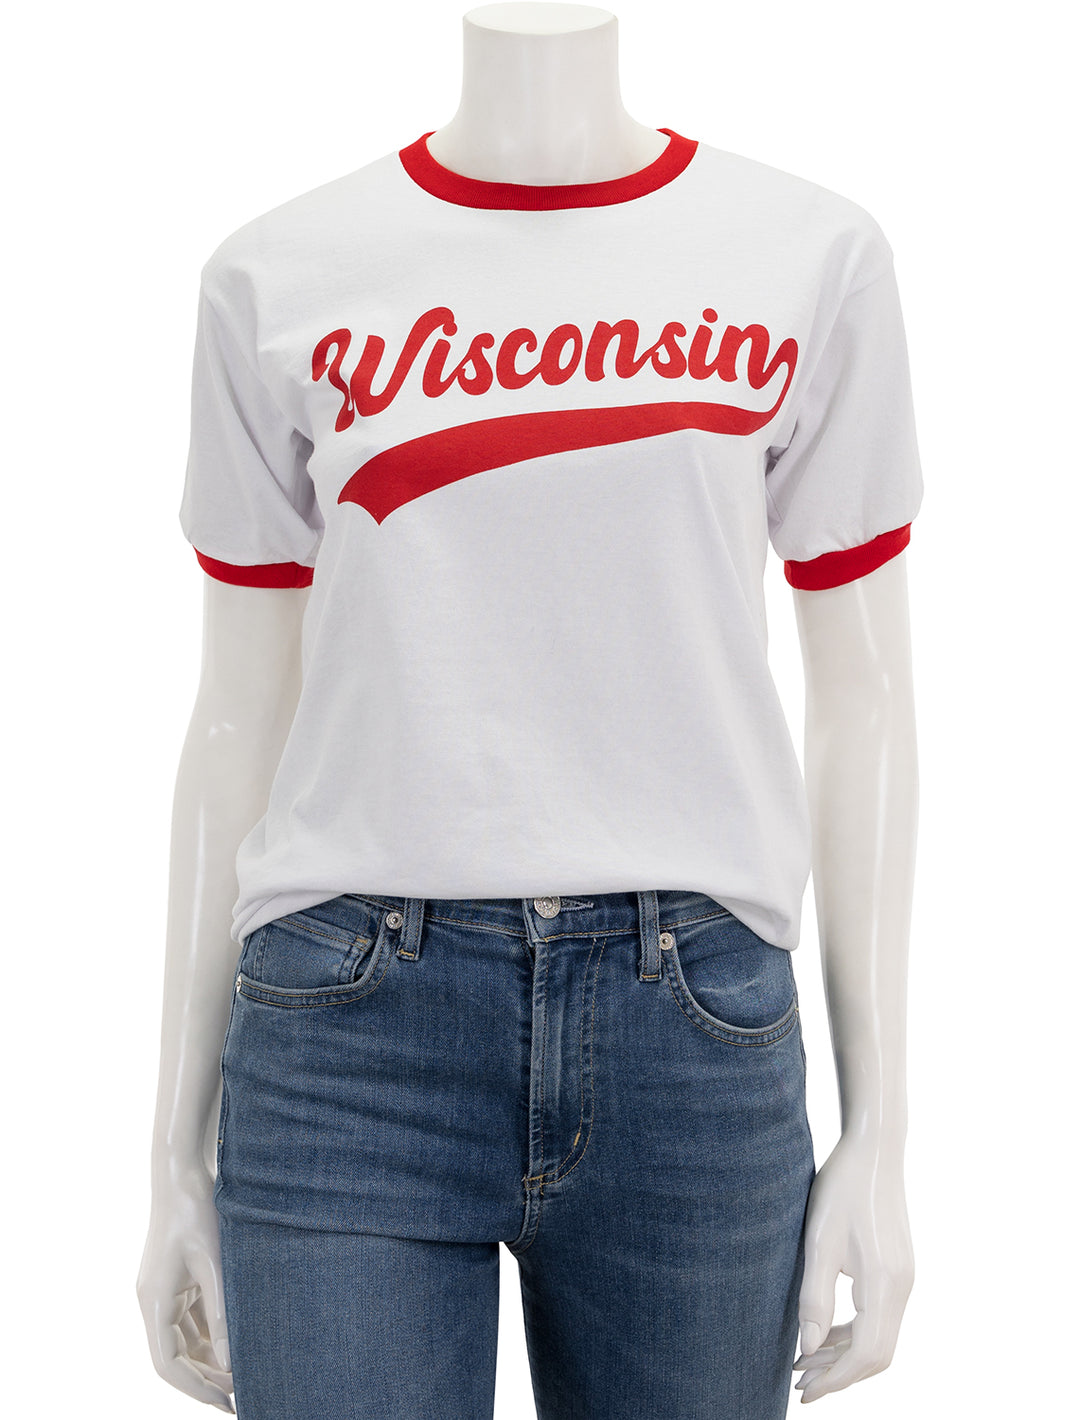 Front view of Recess Apparel's script ringer tee in white and red.